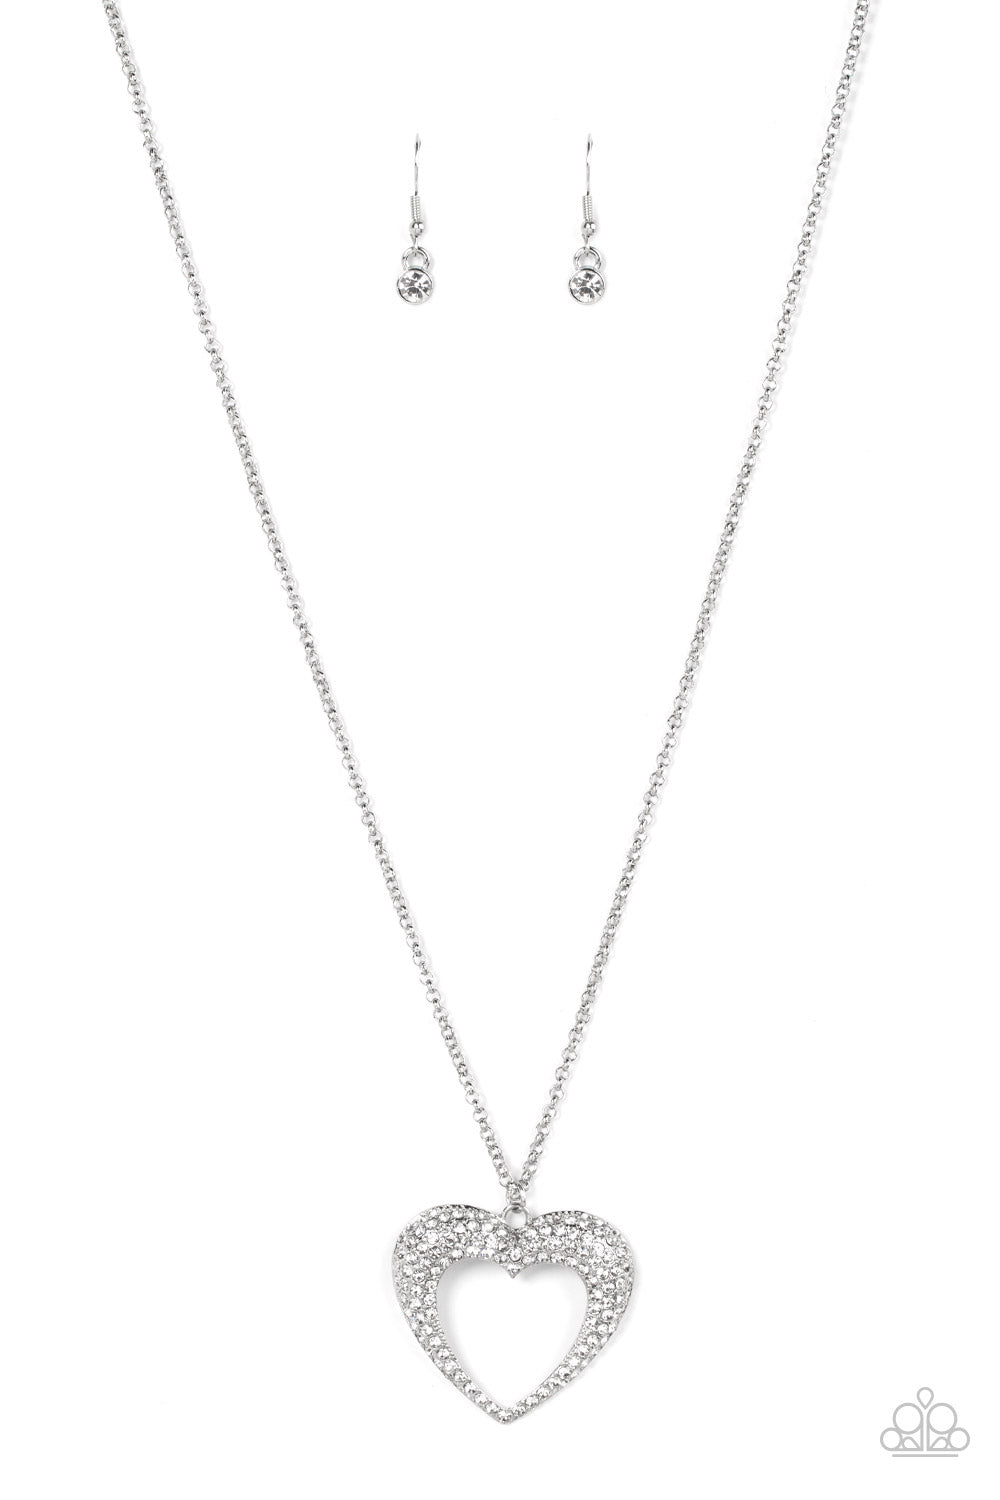 Cupid Charisma White Necklace - Paparazzi Accessories  A flared silver heart is encrusted in glassy white rhinestones, resulting in a romantic shimmer at the bottom of an extended silver chain. Features an adjustable clasp closure.  Sold as one individual necklace. Includes one pair of matching earrings.